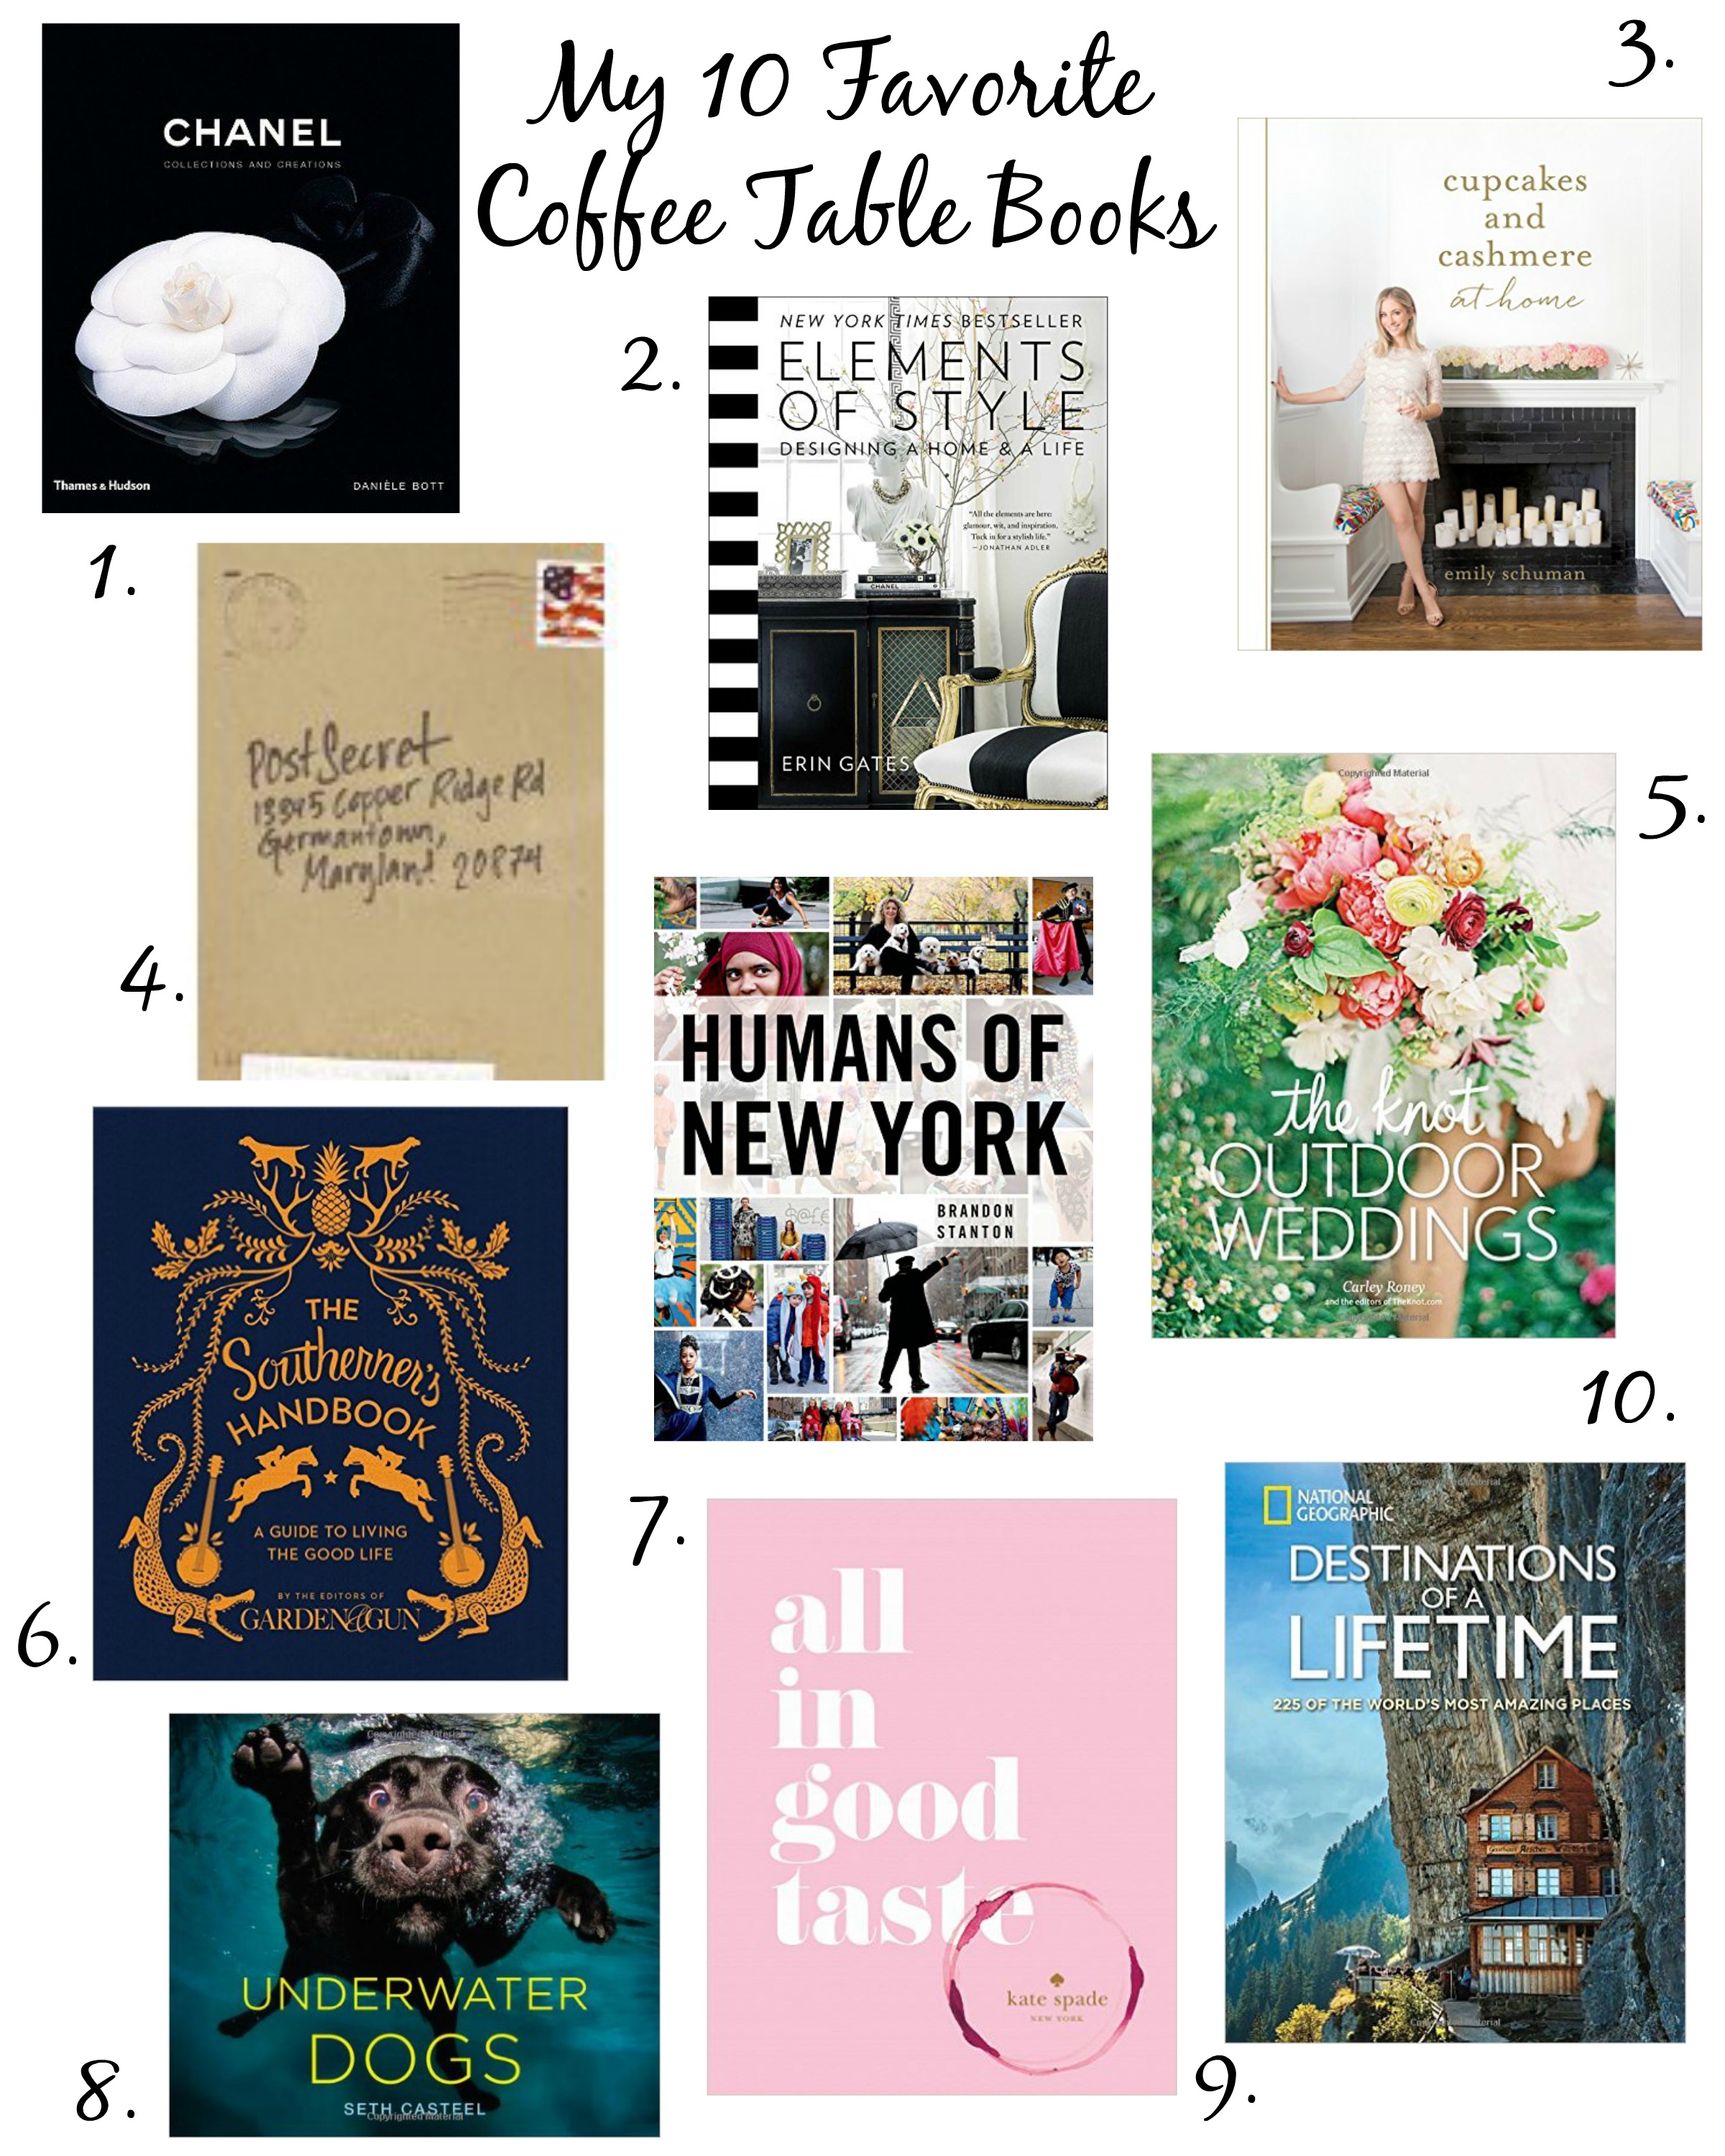 My 10 Favorite Coffee Table Books by lifestyle blogger Amy of Coffee Beans and Bobby Pins